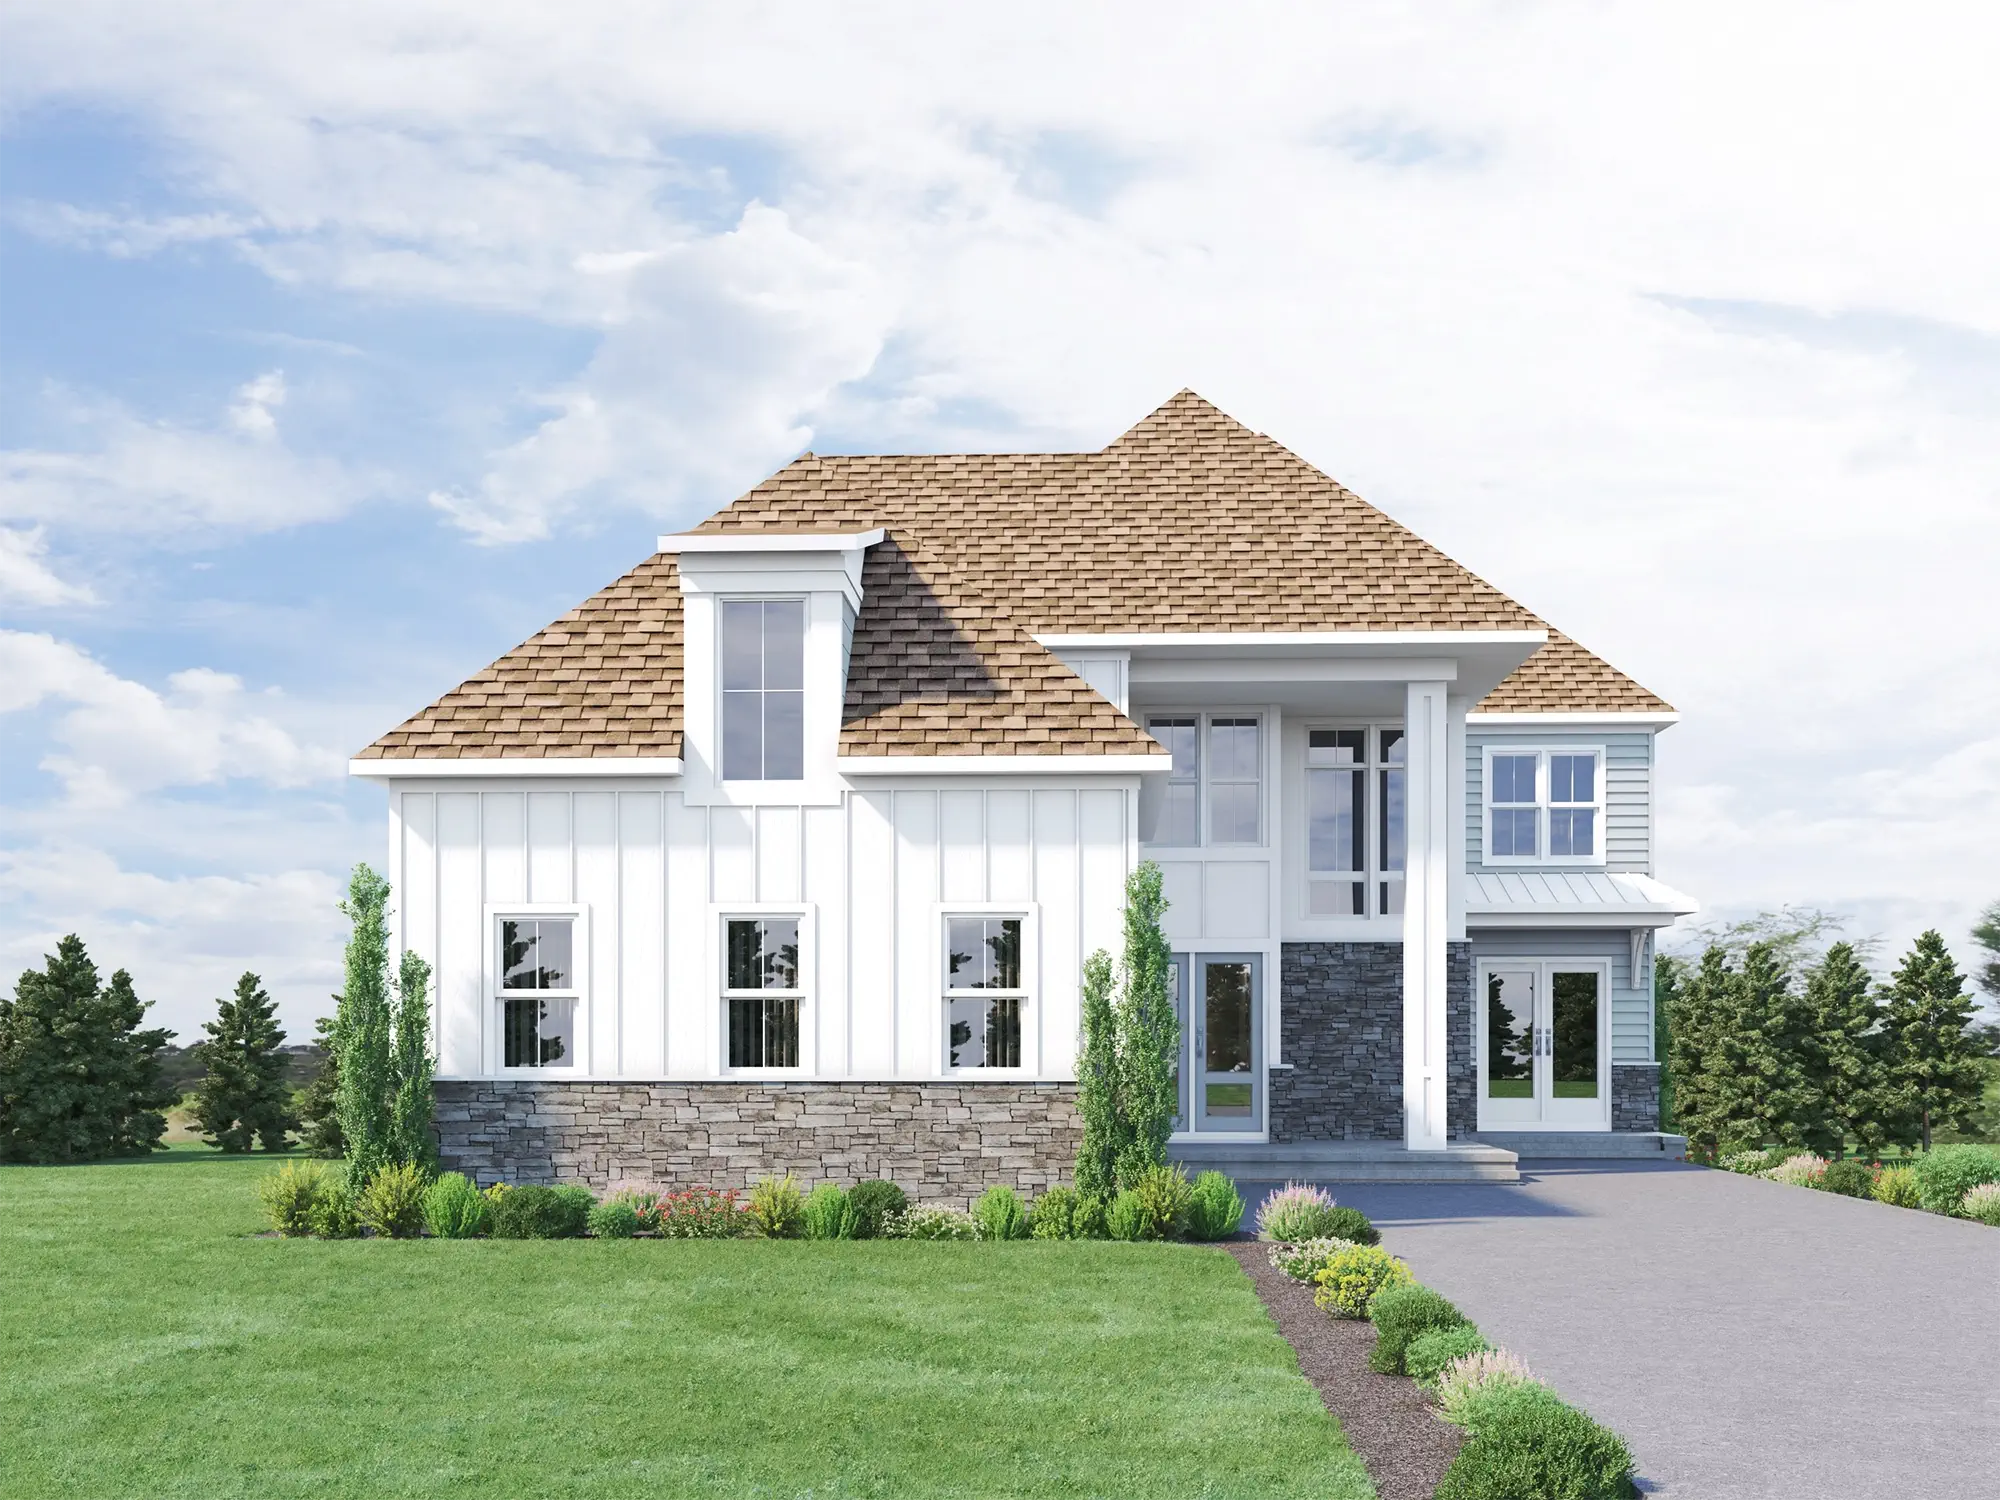 waterside - House Render front View